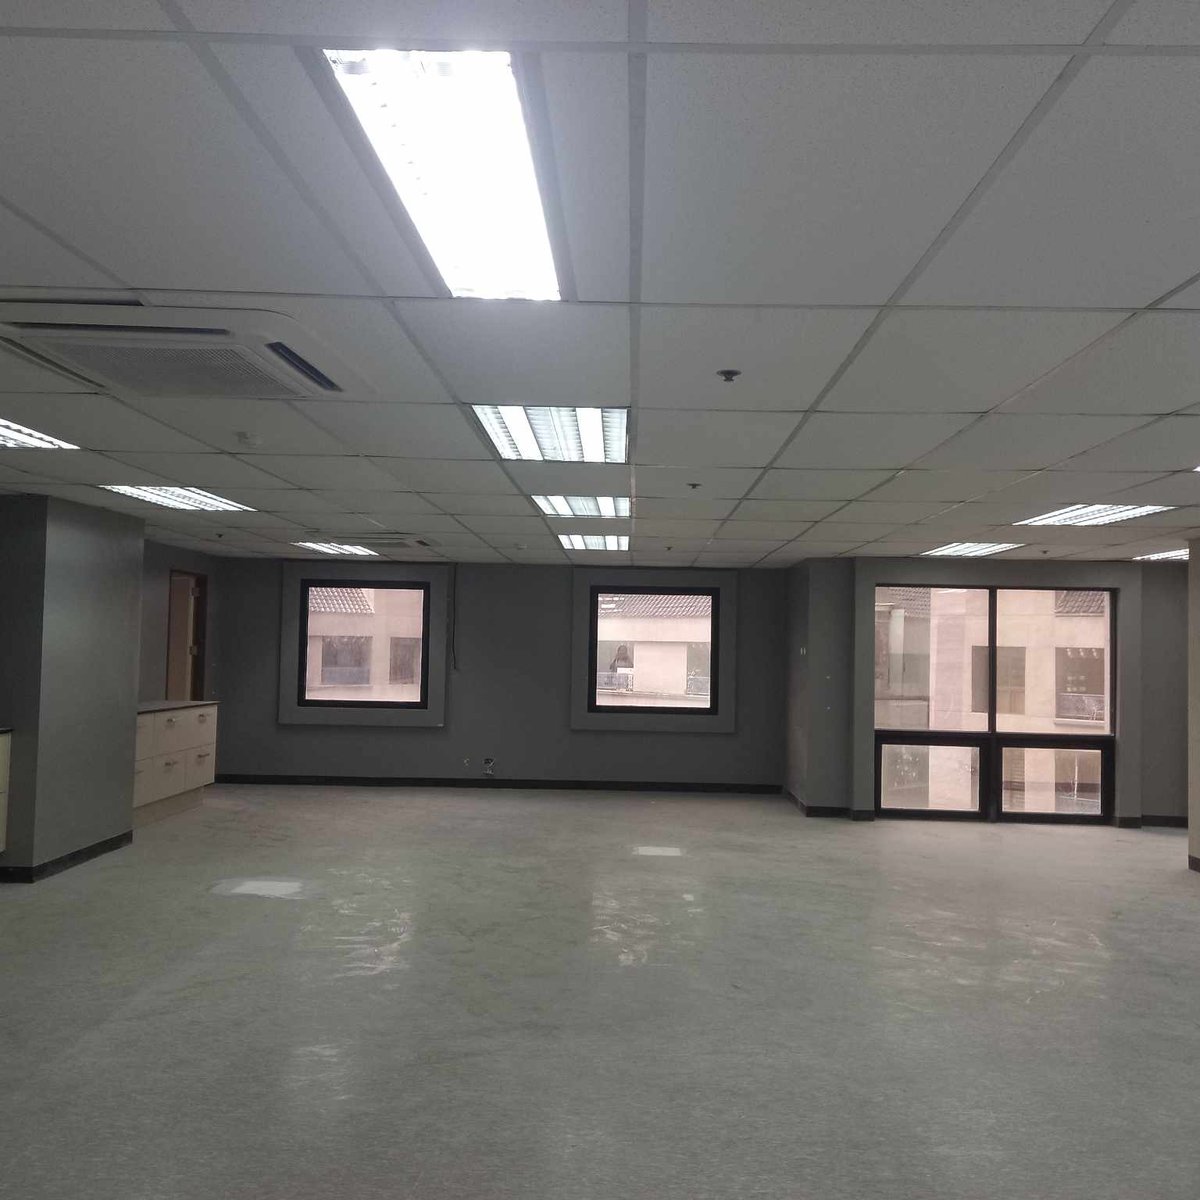 For Rent Lease Office Space Ortigas Center Pasig 269 sqm